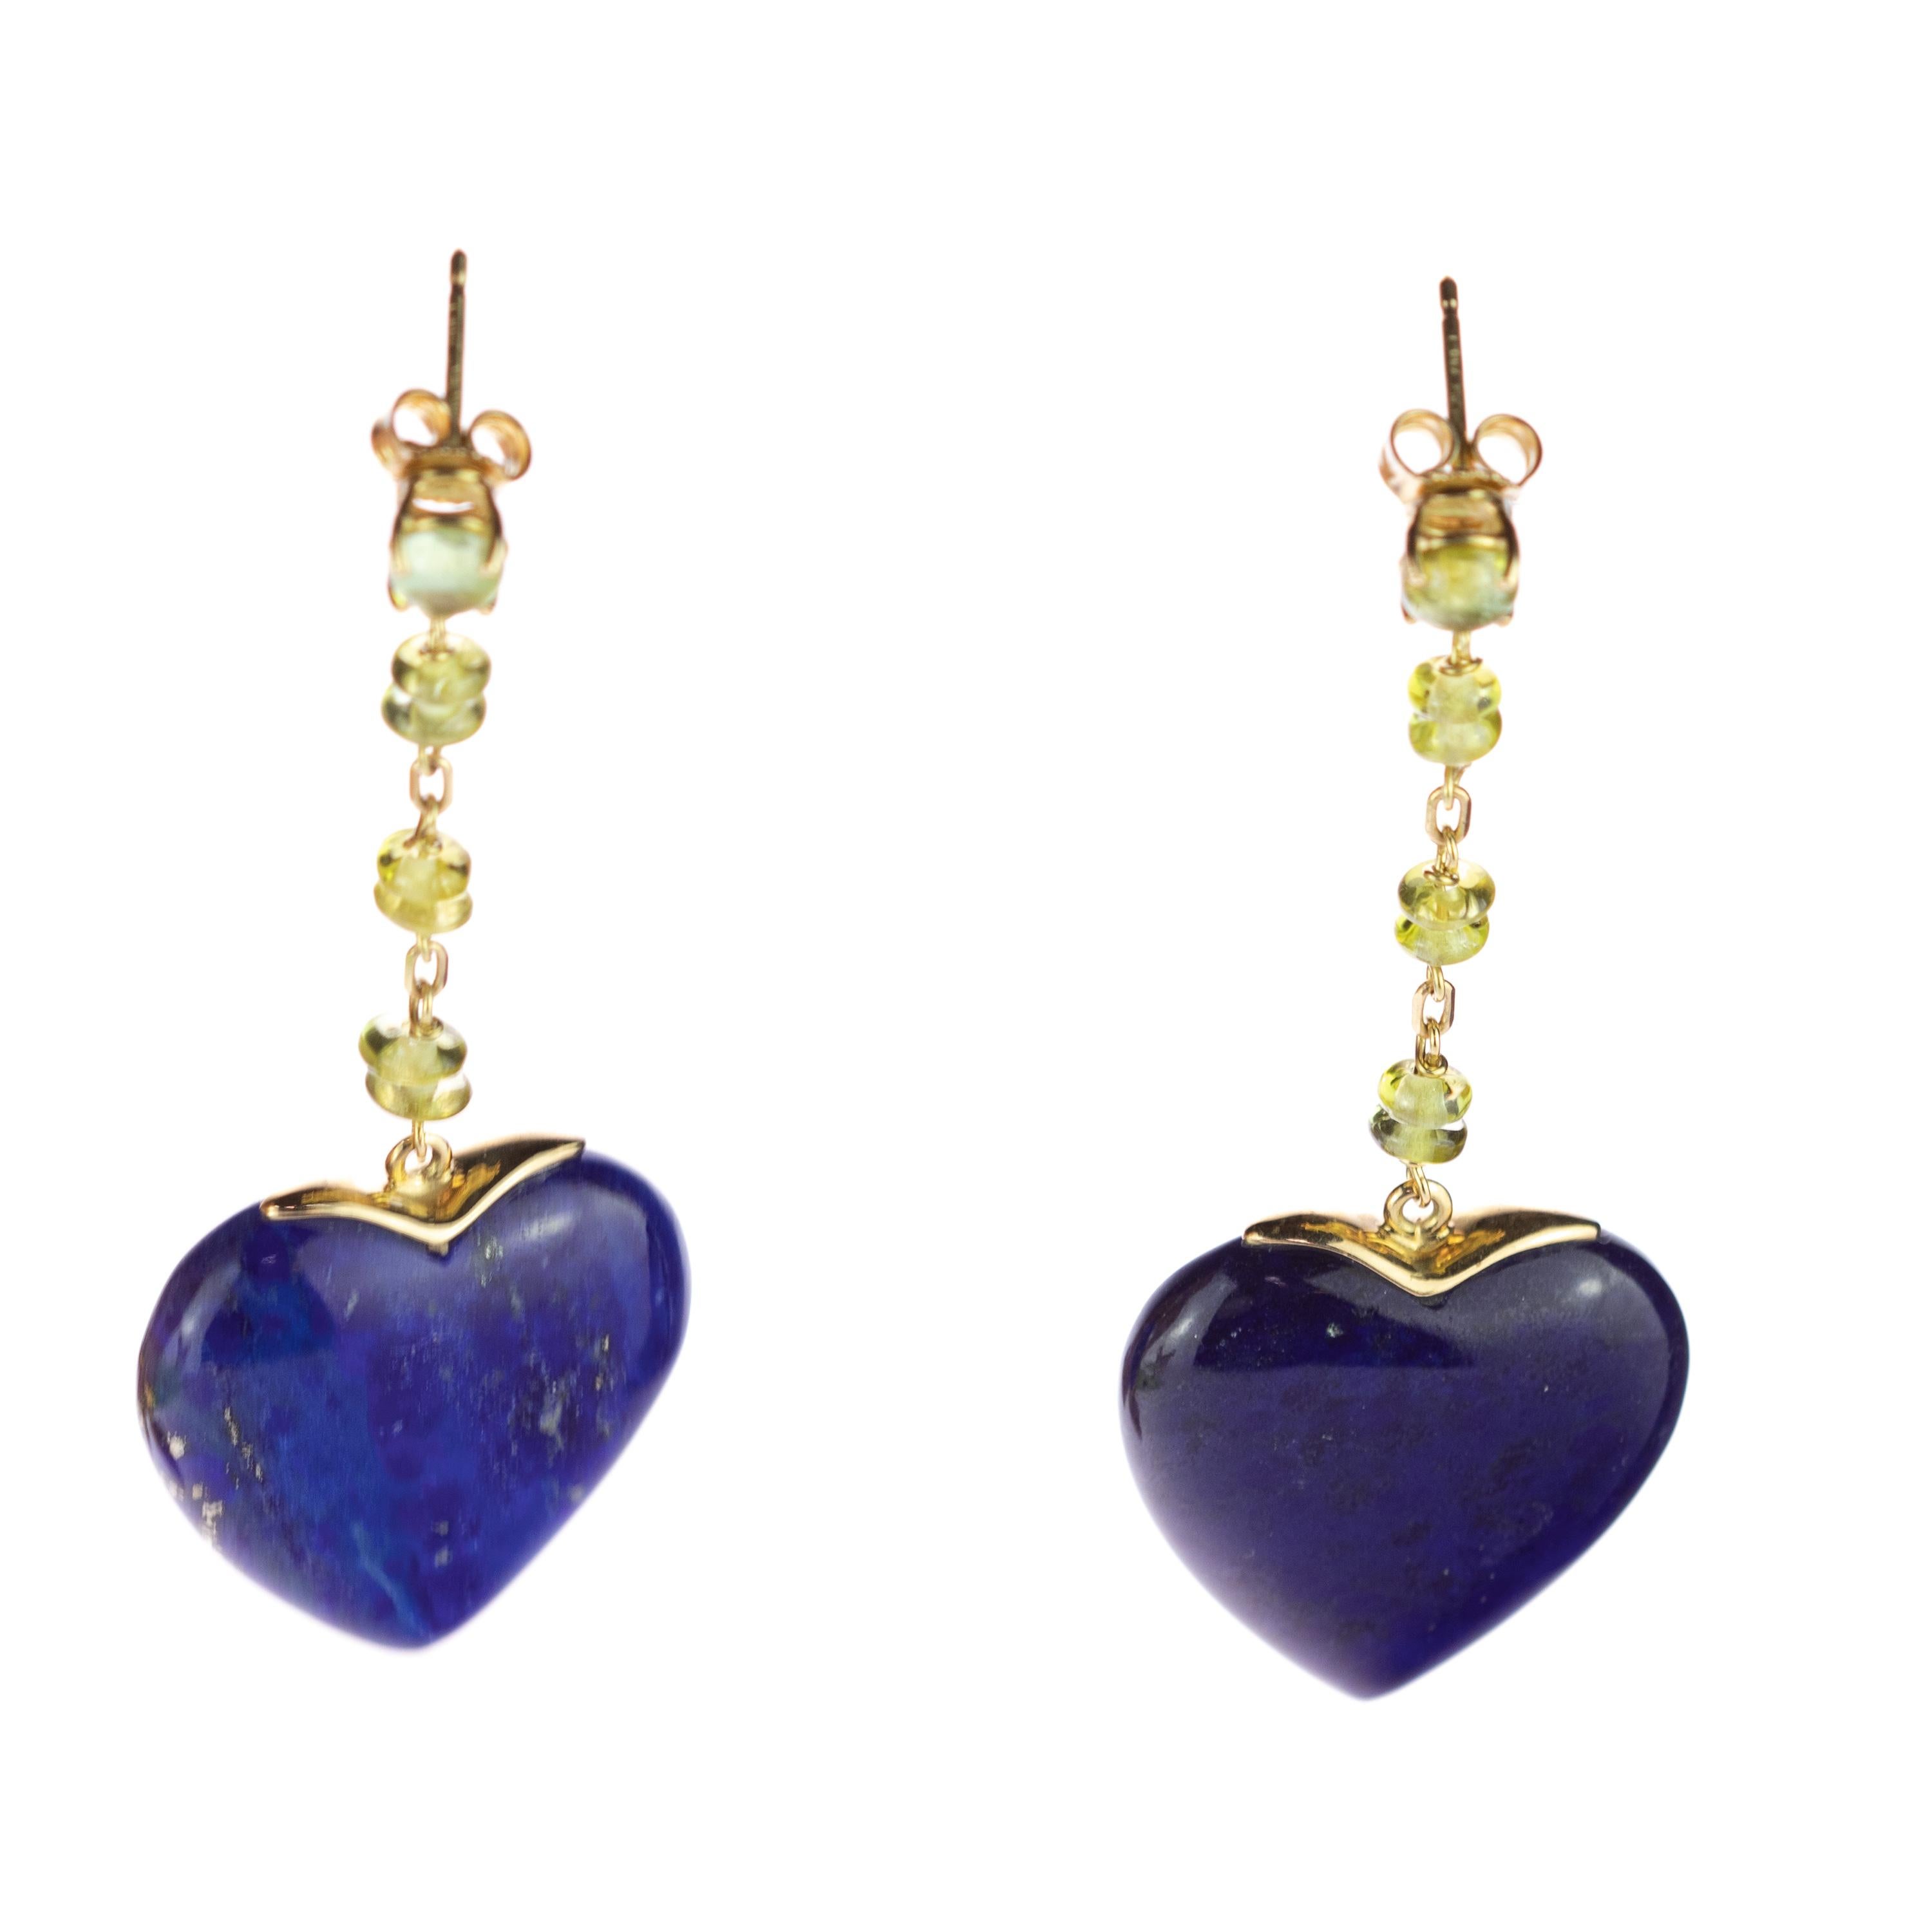 These breathtaking Intini Jewels Lapis Lazuli and Peridot drop earrings, have a sweet design and the most precious stones. Drop dangle earrings composed by a 18 karat yellow long delicate chain, inspired by the pure feeling of love and inner